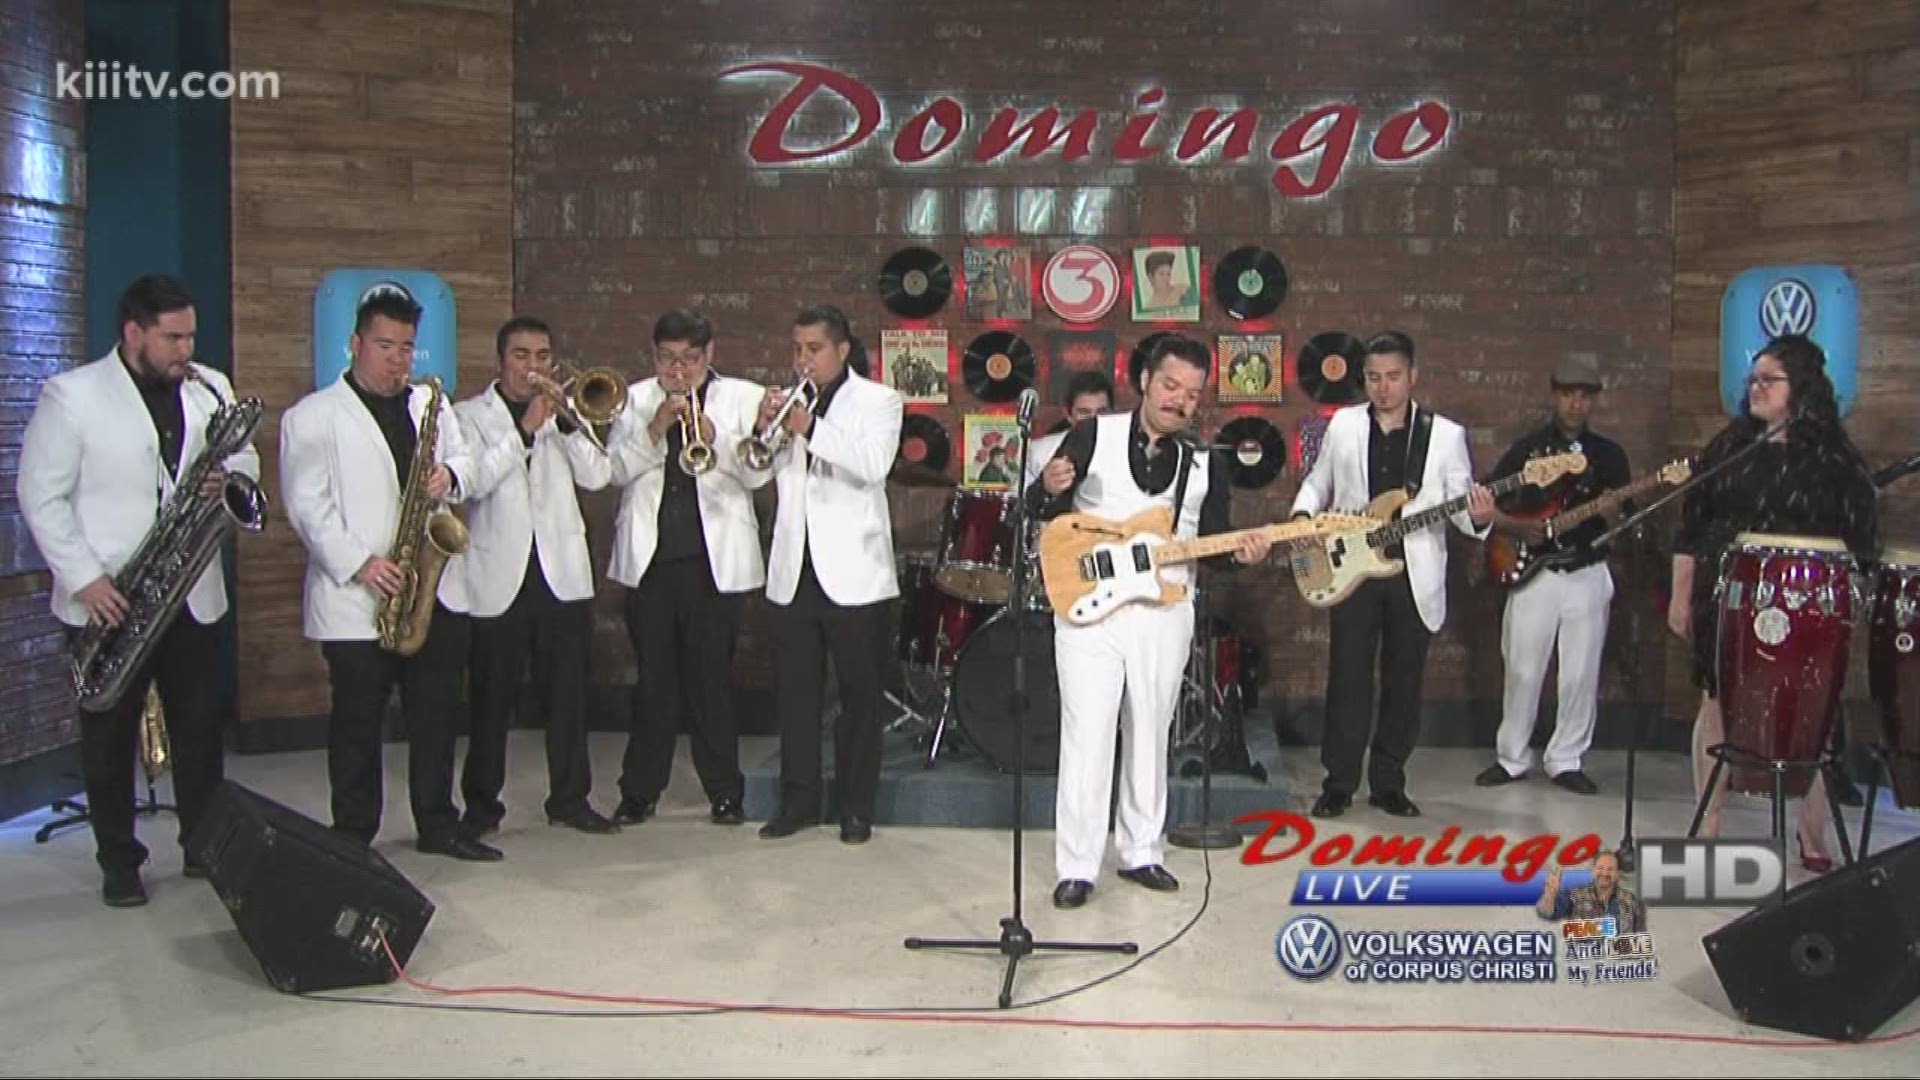 La 45 performing "Where Would I Be Without You" on Domingo Live.